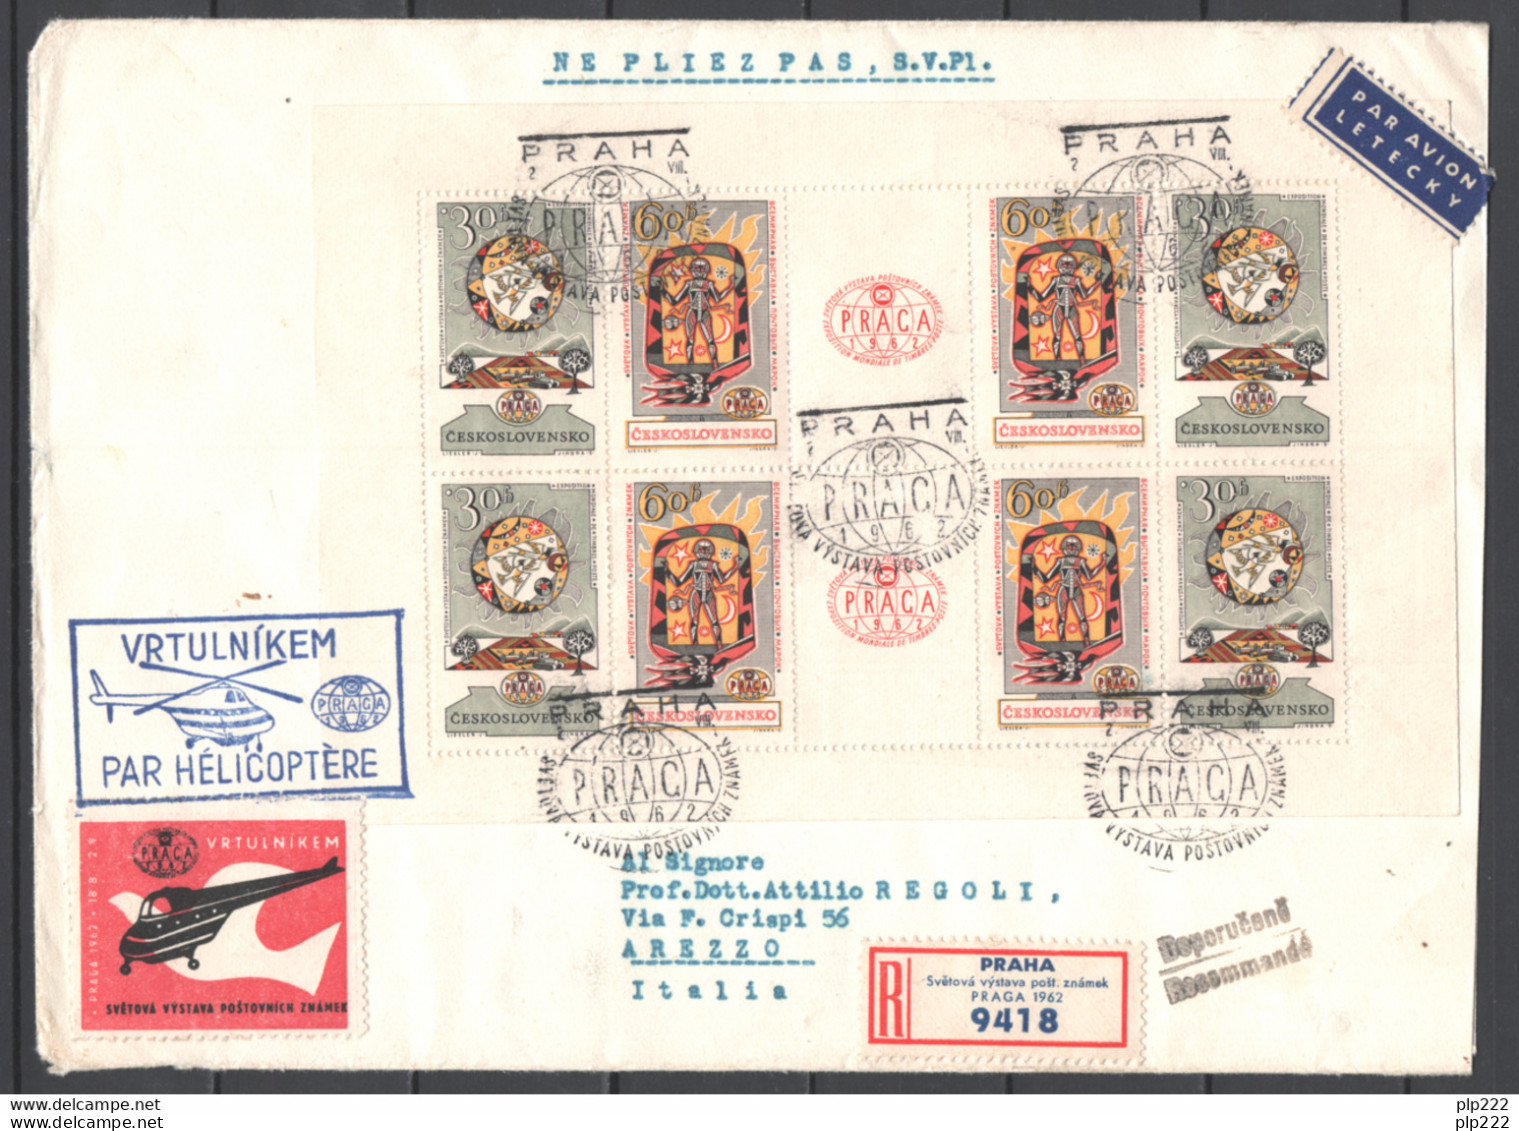 Cecoslovacchia 1962 Unif.1355/56 Minisheet Of 4 On Cover VF/F - Covers & Documents